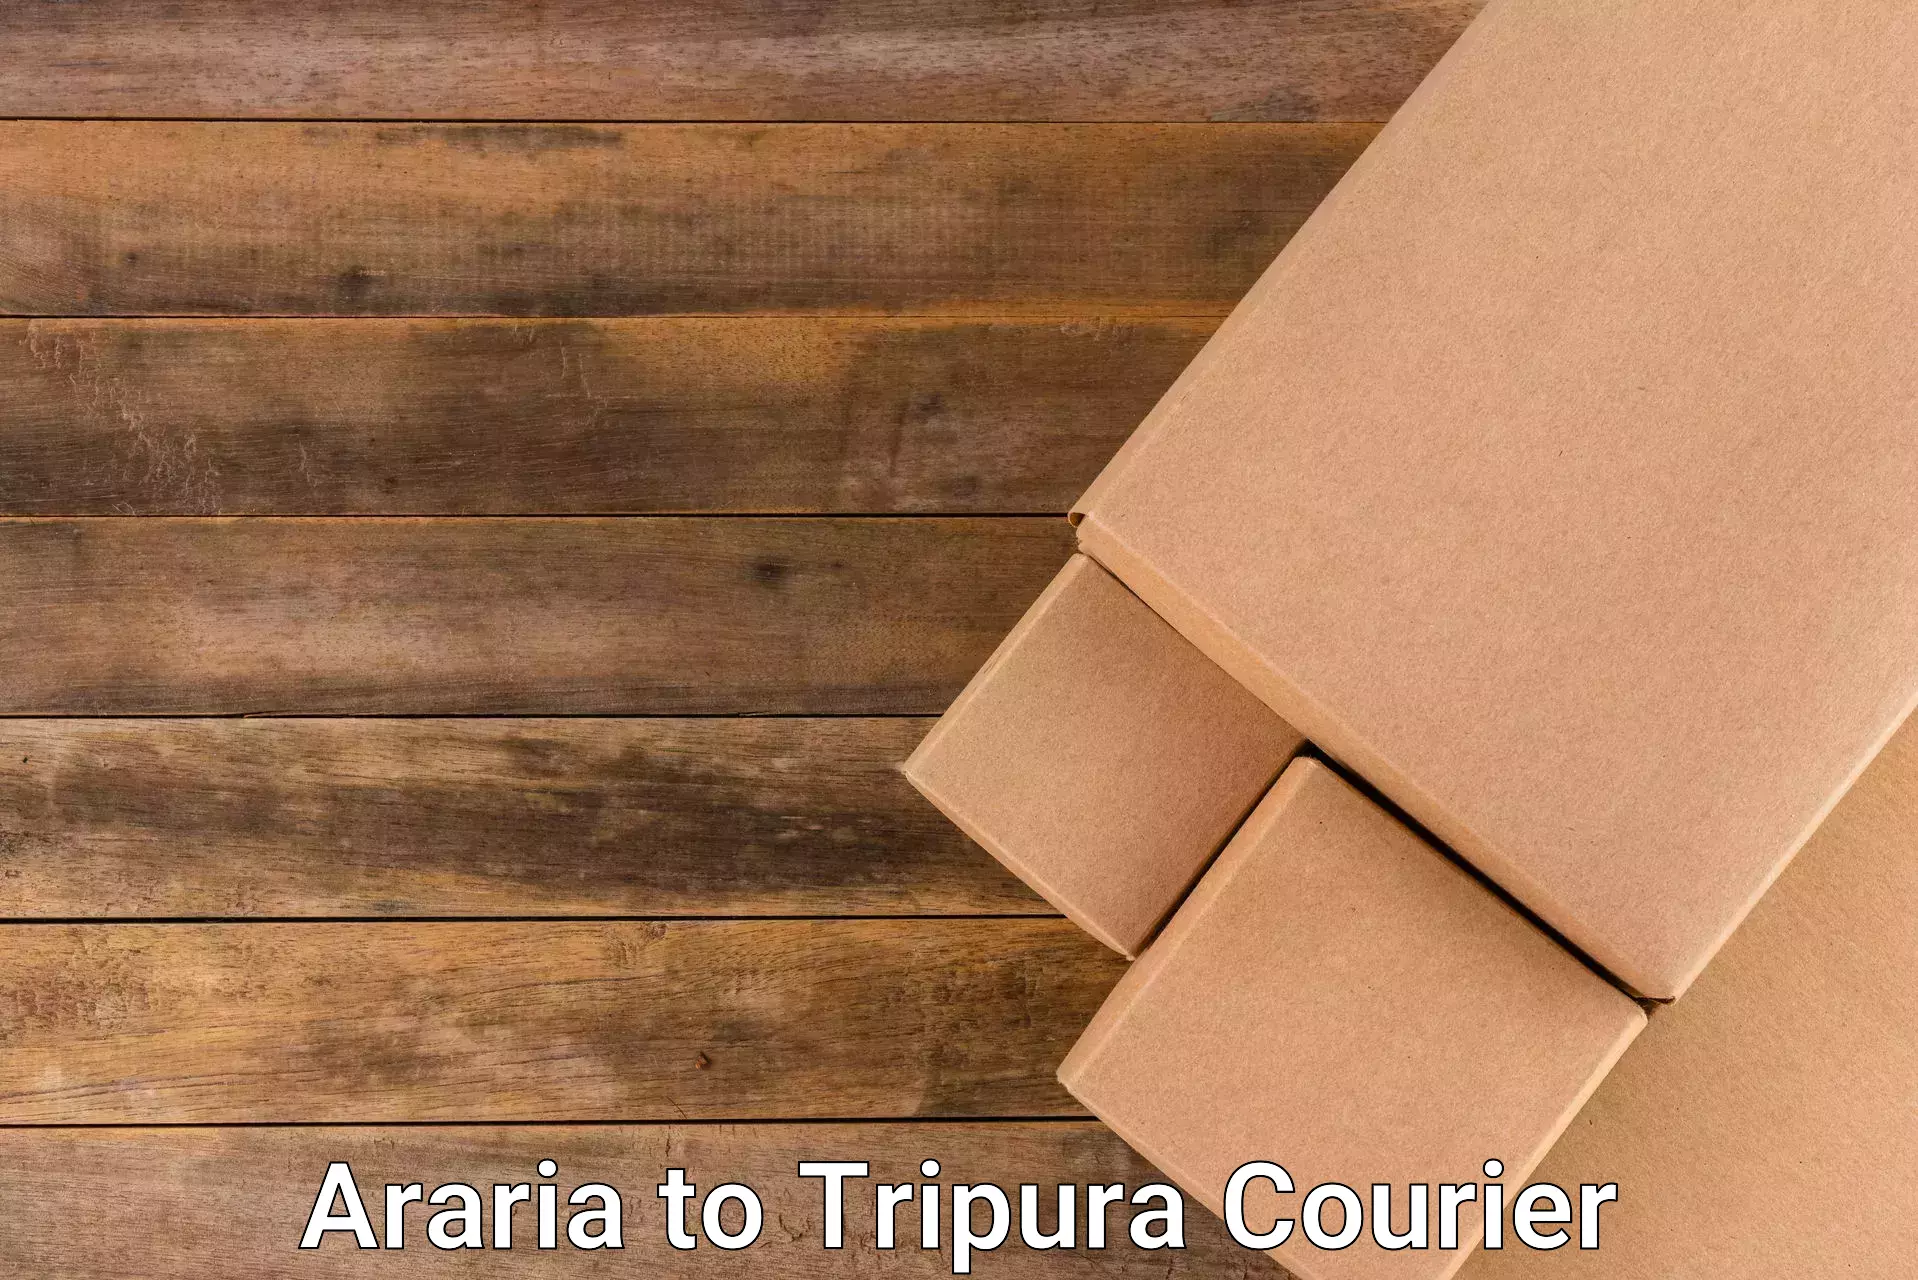 Global courier networks Araria to Tripura